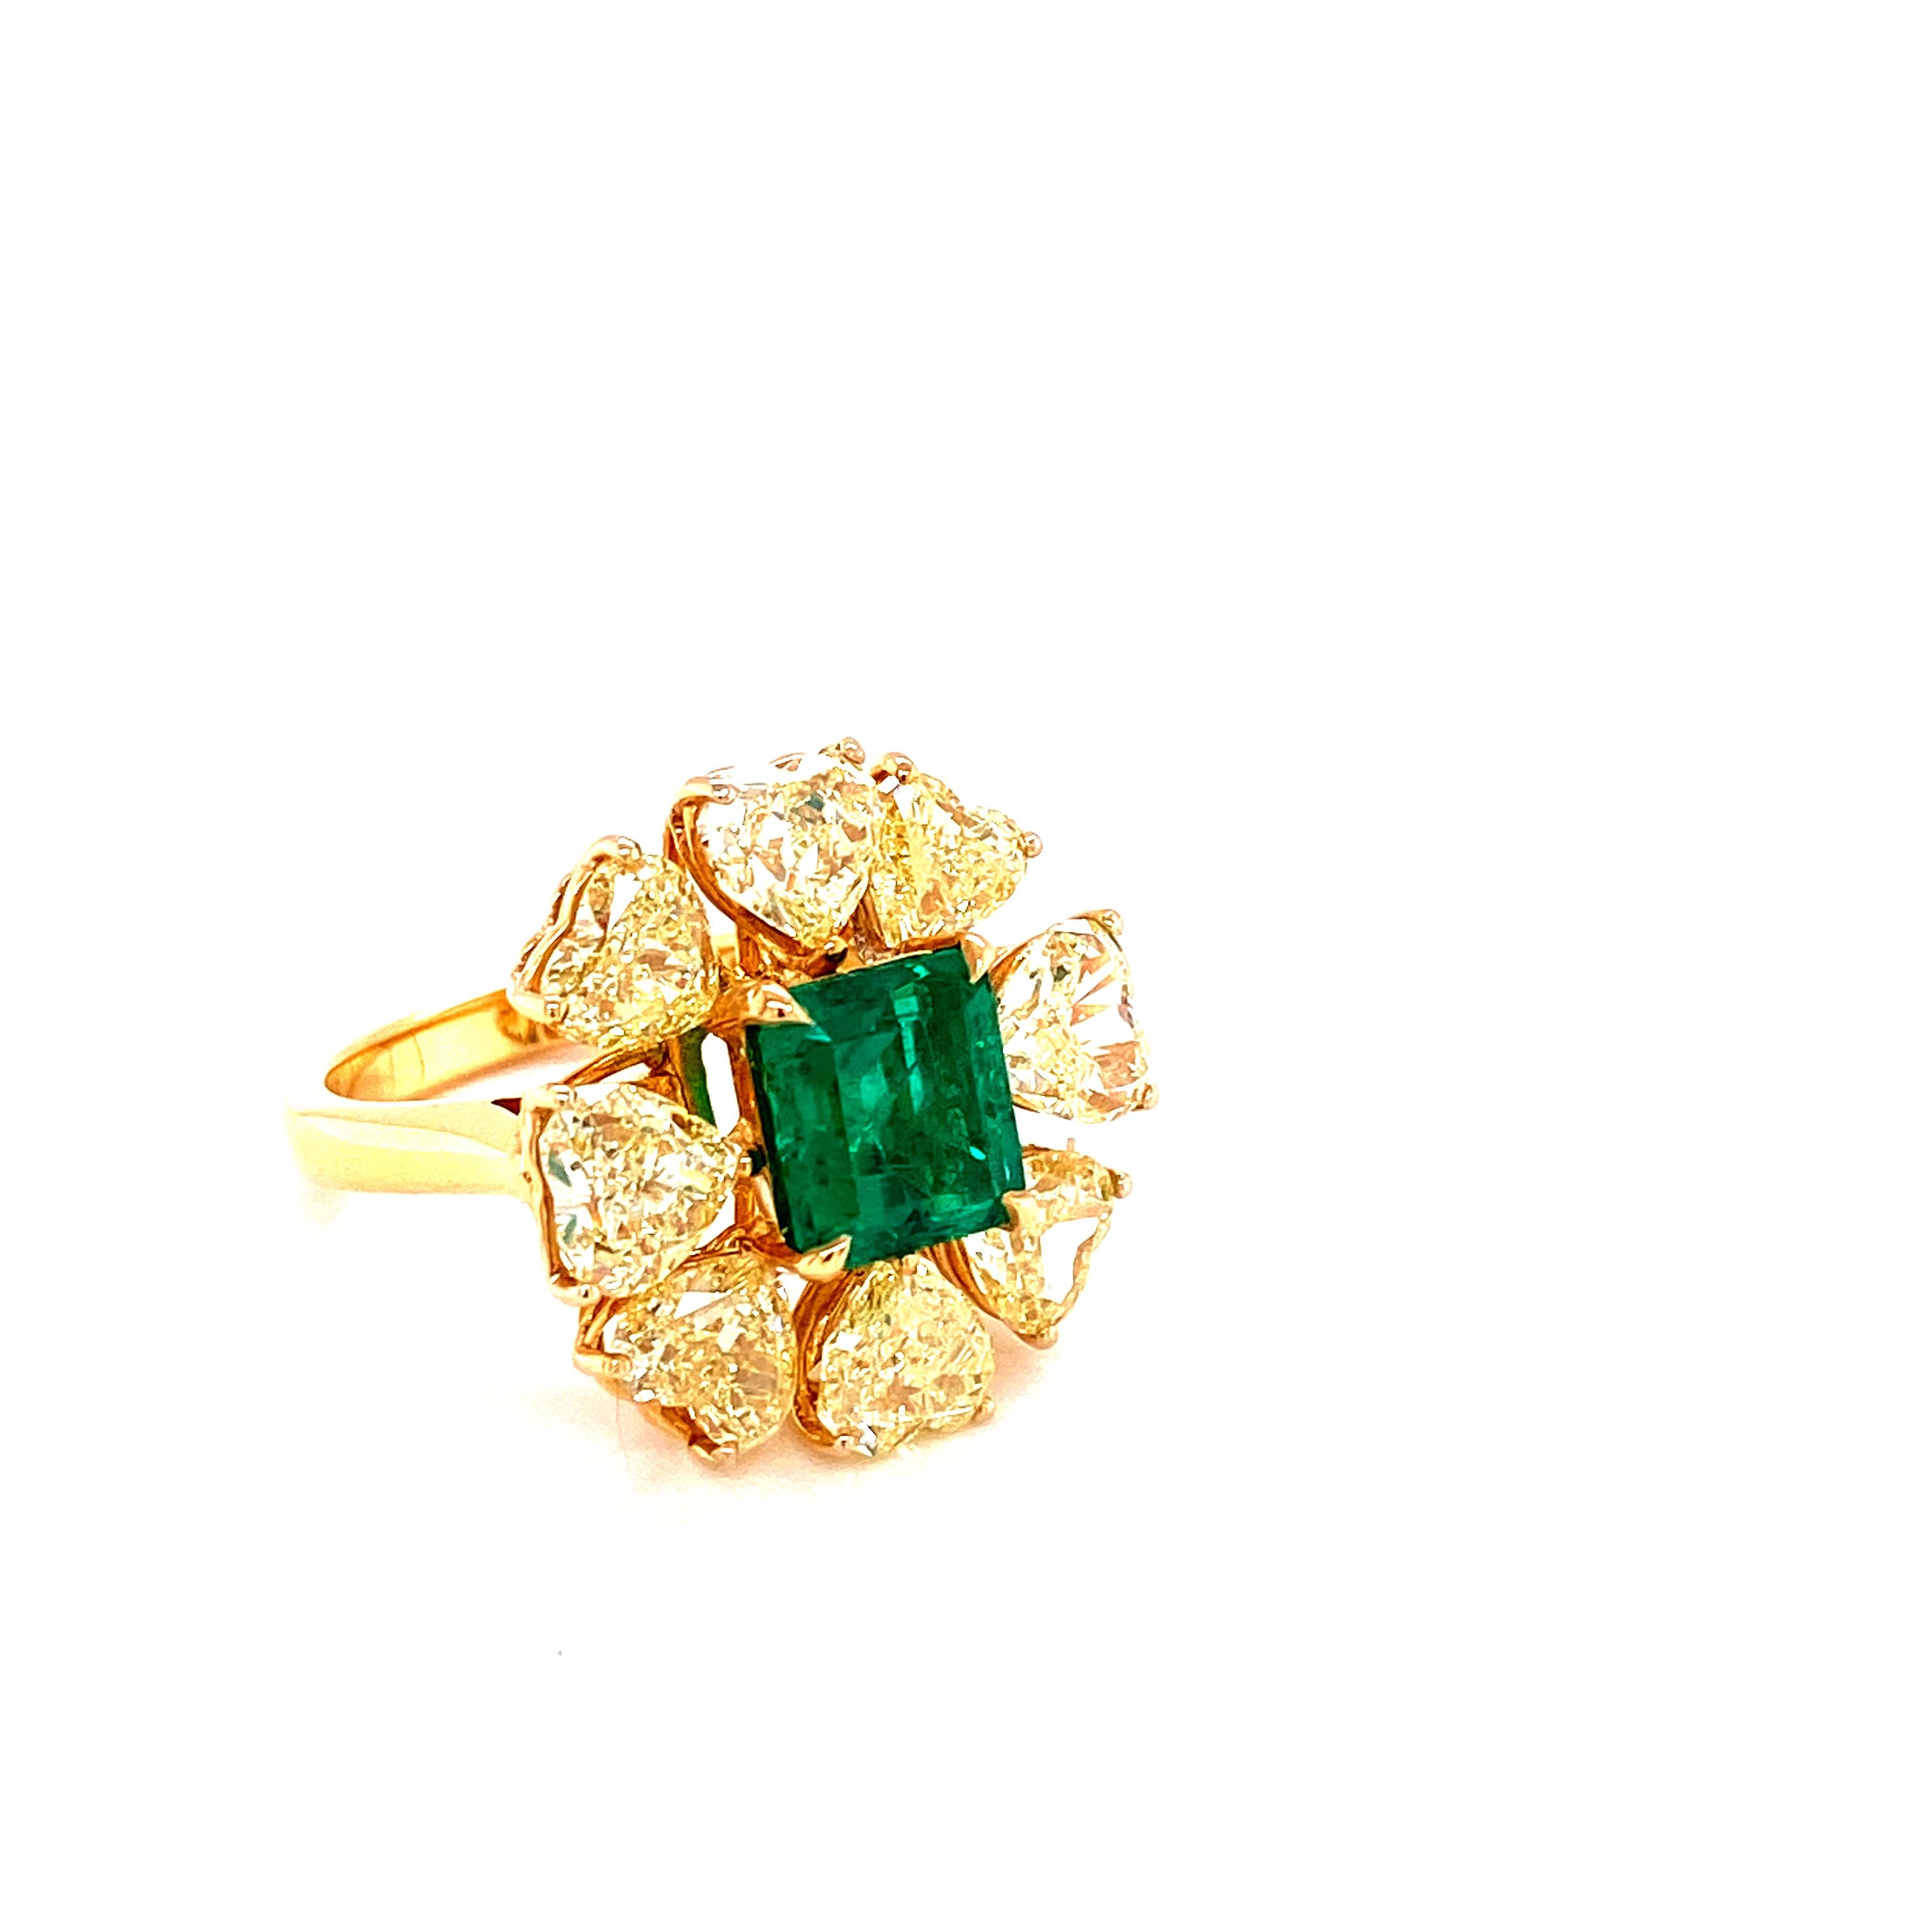 Contemporary 2.08 Carat GRS Certified Vivid Green Colombian Emerald and Yellow Diamond Ring